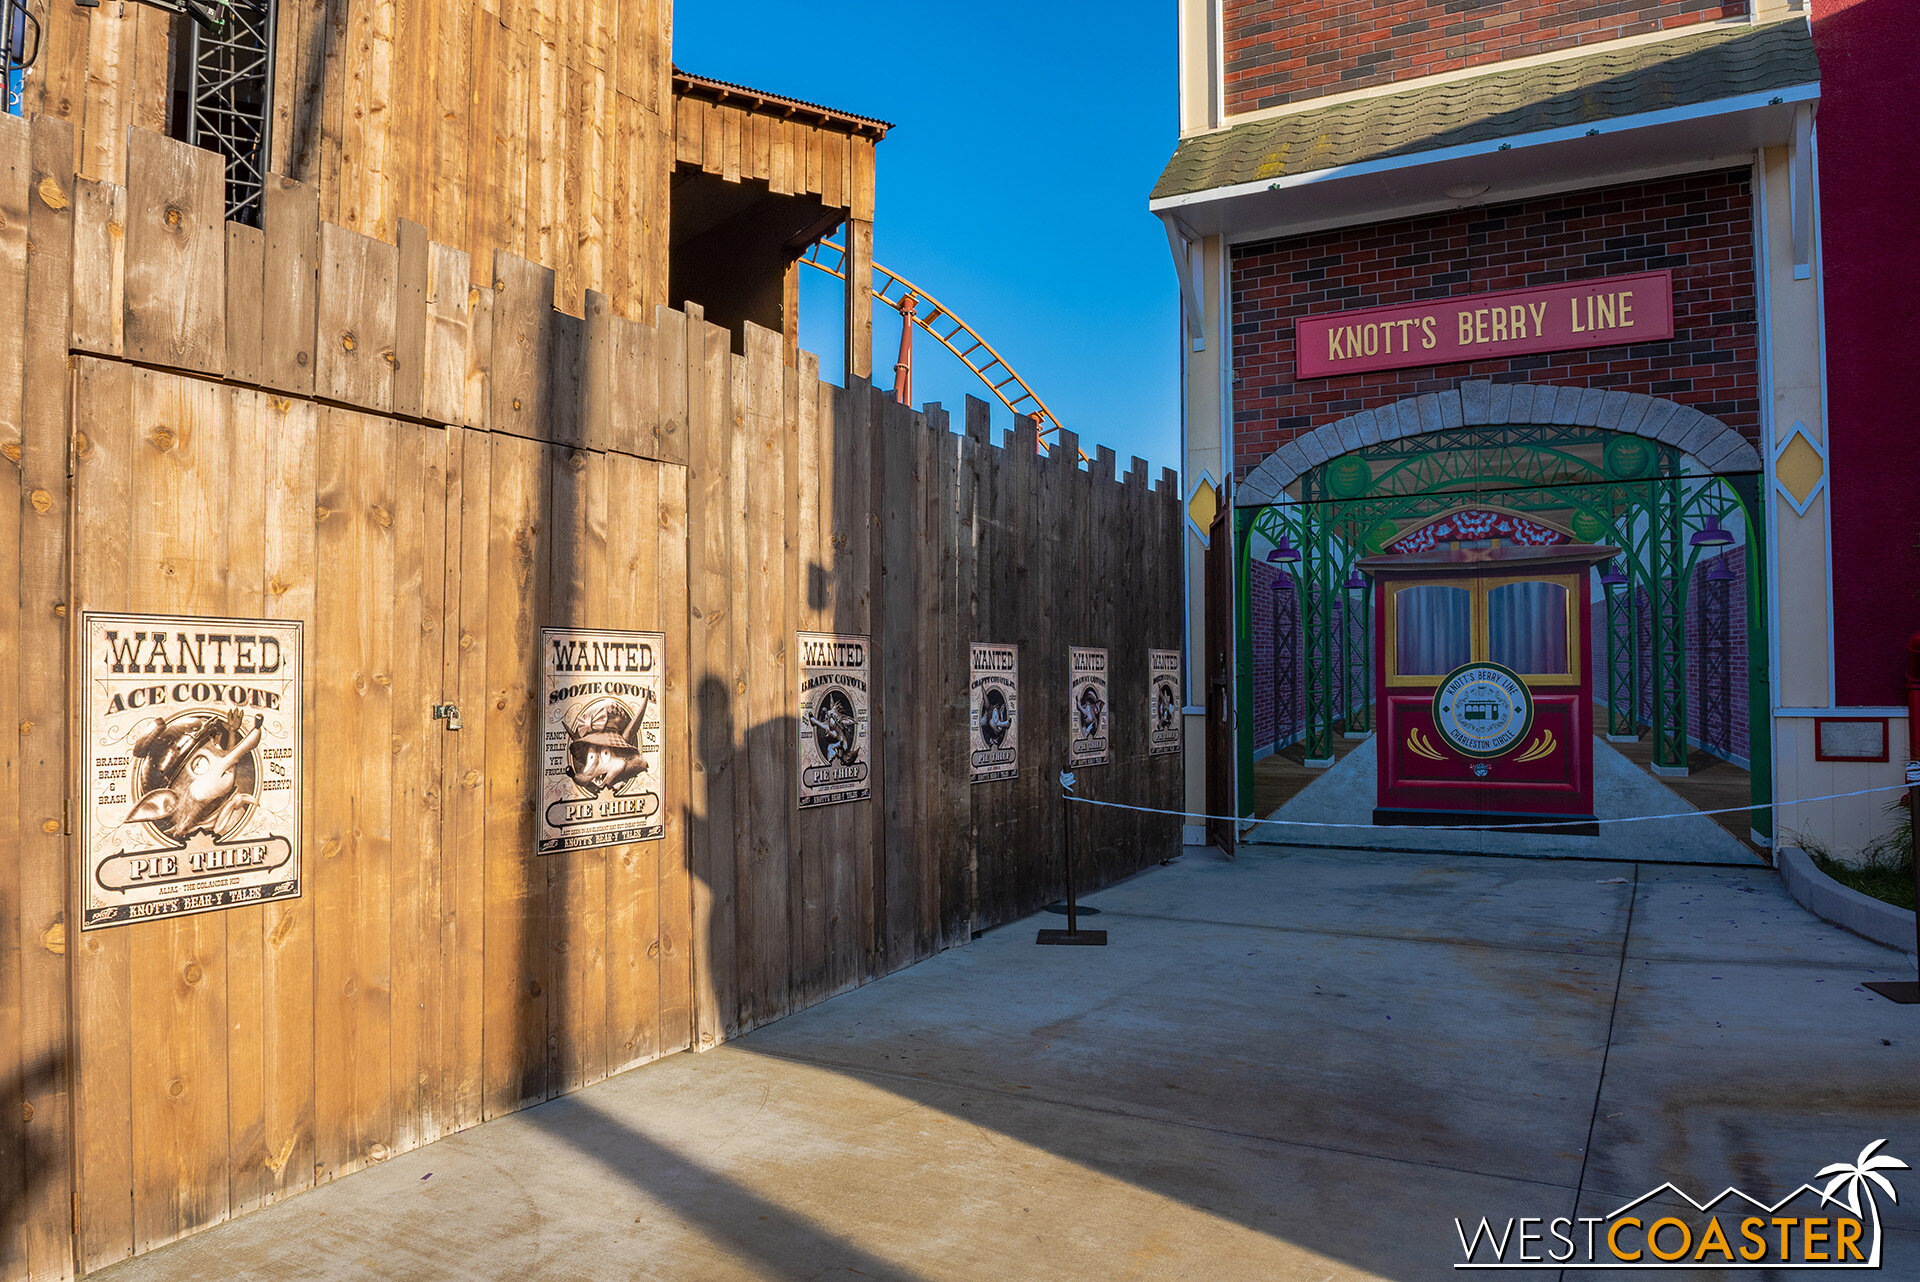  There have been little touches of historic Knott’s being brought back. 